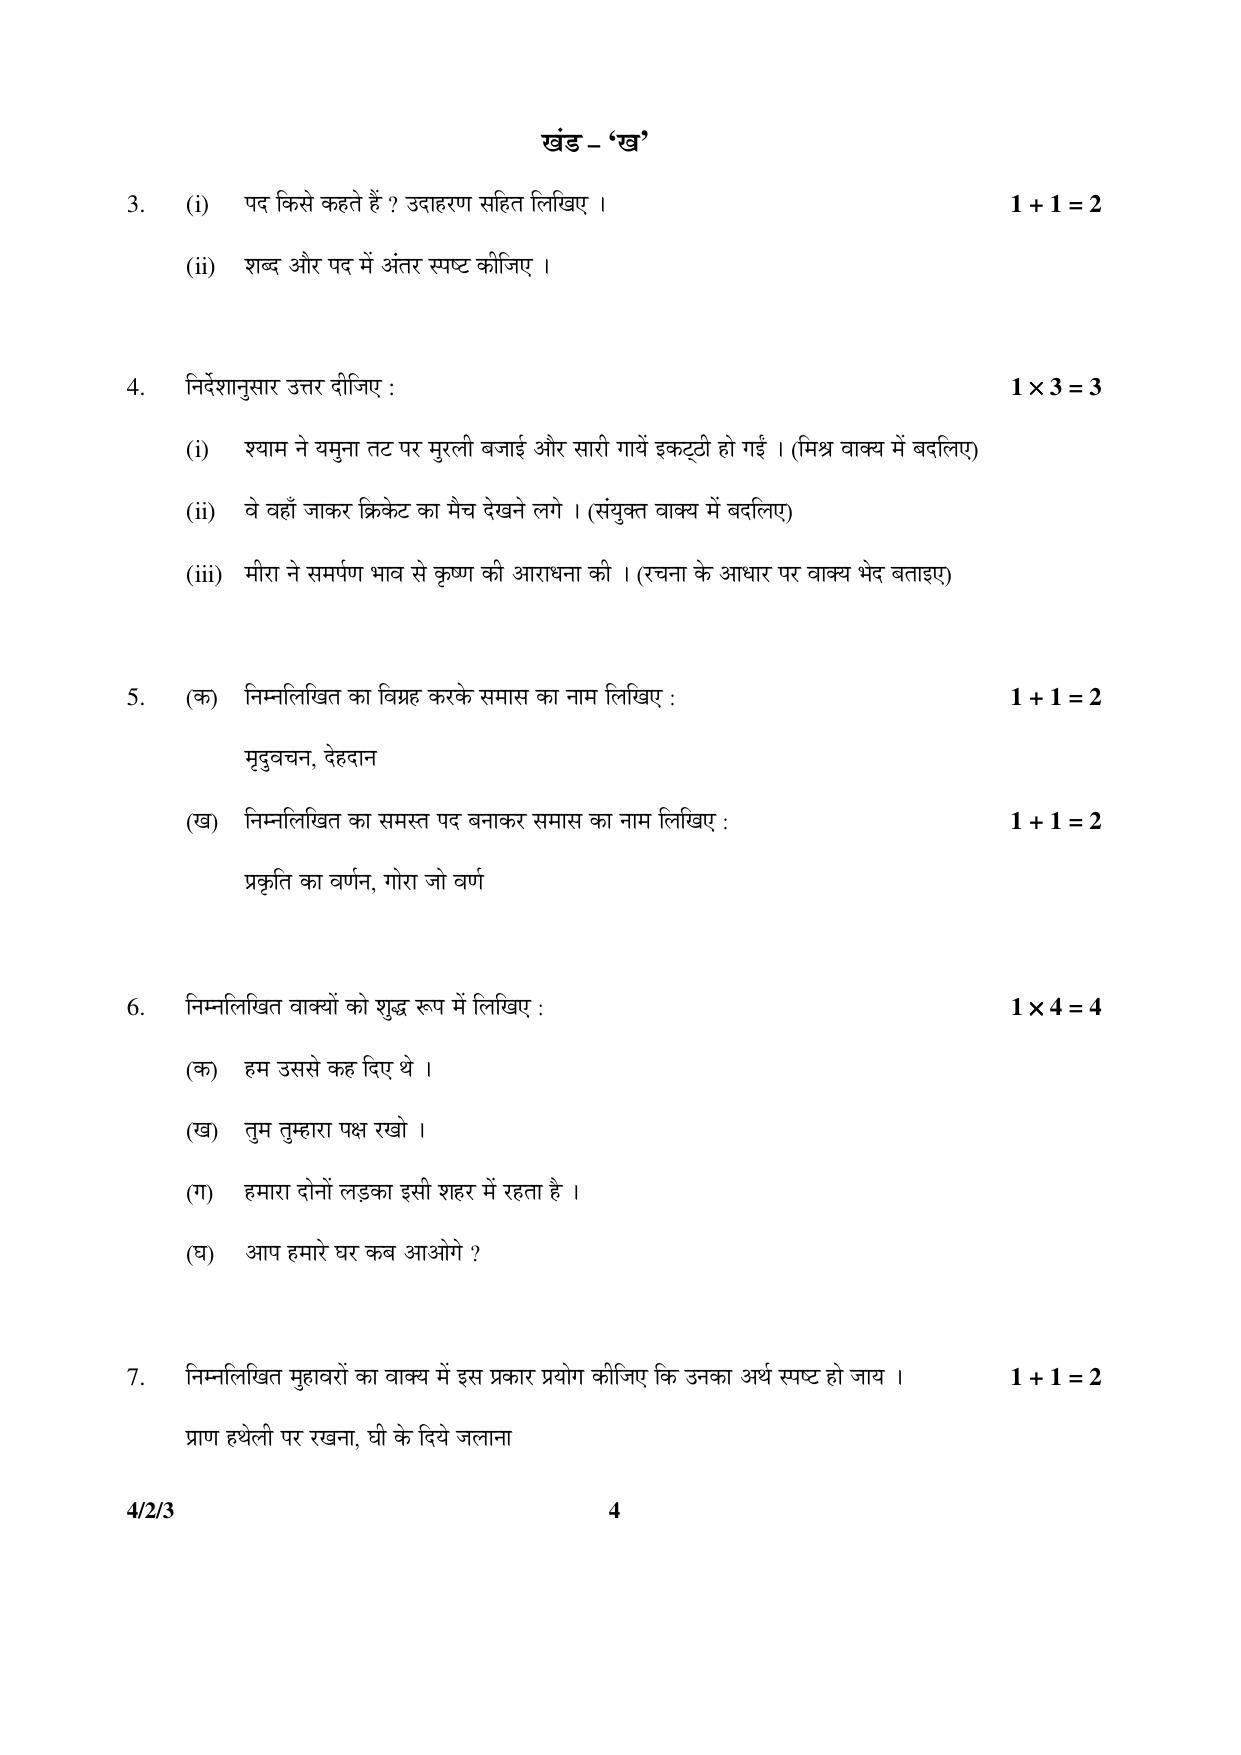 CBSE Class 10 4-2-3  Hindi - B 2016 Question Paper - Page 4